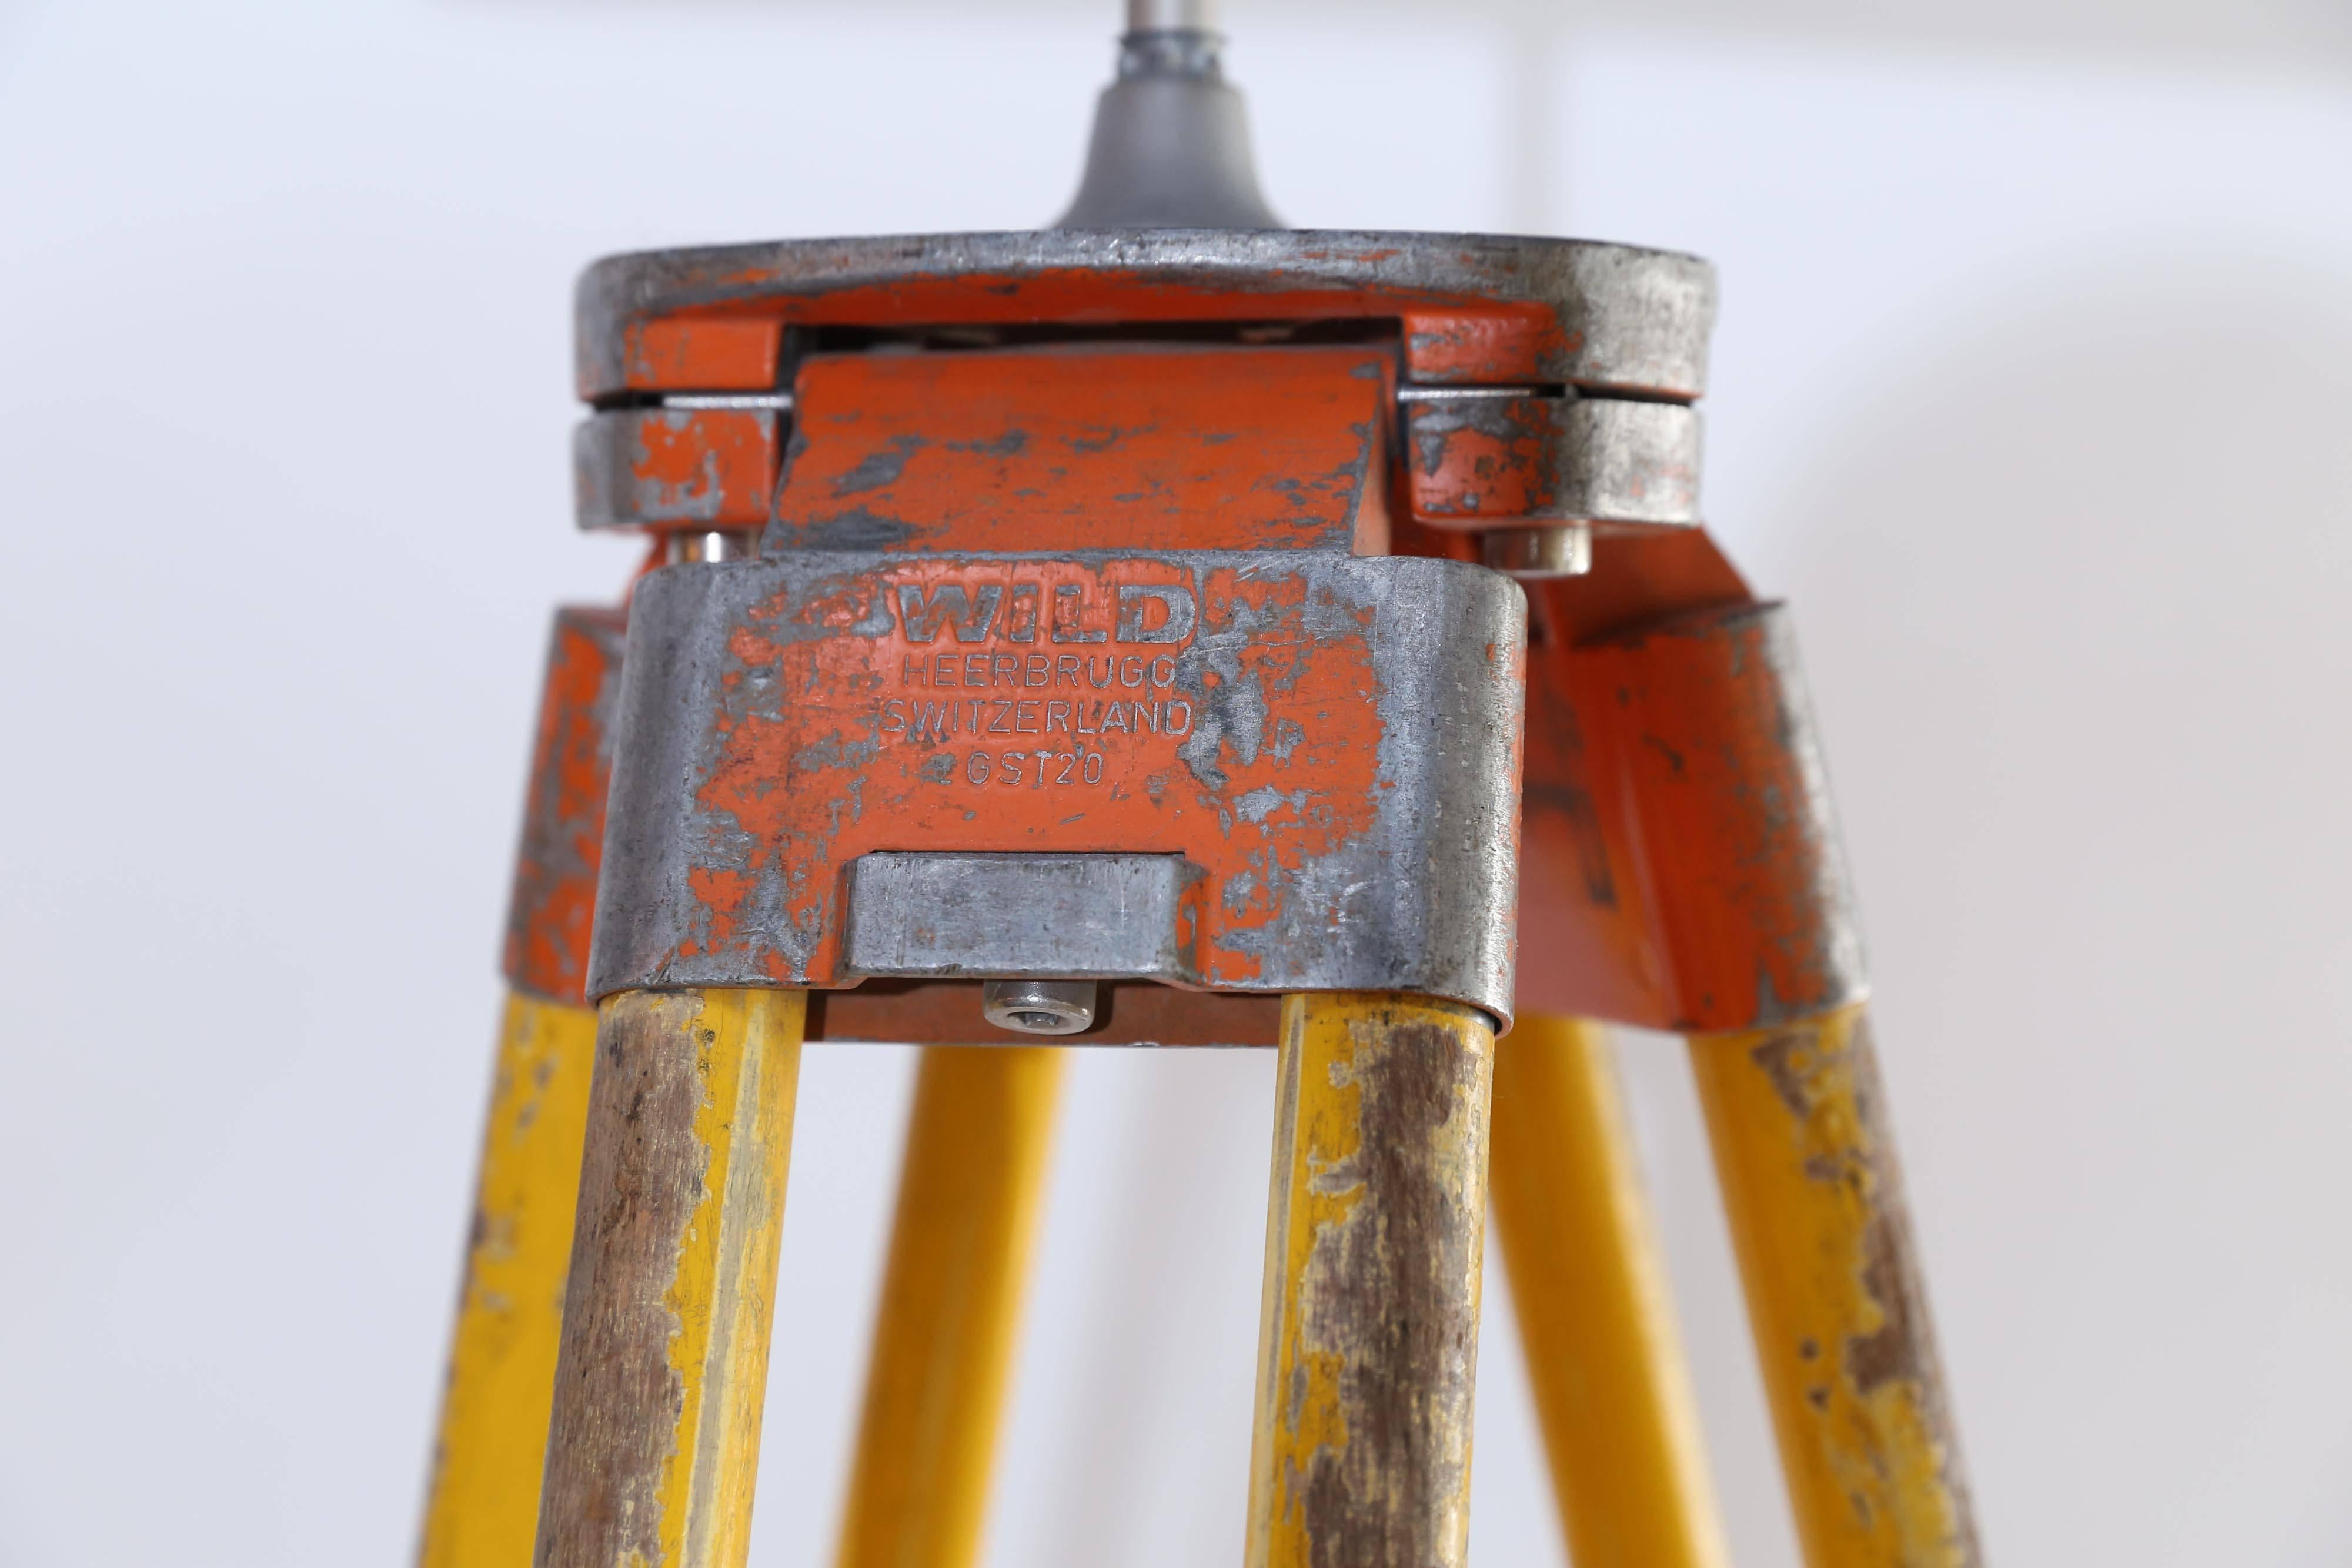 A vintage surveyor's tripod from the Wild Heerbrugg Company of Switzerland made into a versatile floor/table lamp. Made of alpine beech with original bright yellow paint, the tripod has external wiring with a yellow rocker switch suspended 18 inches